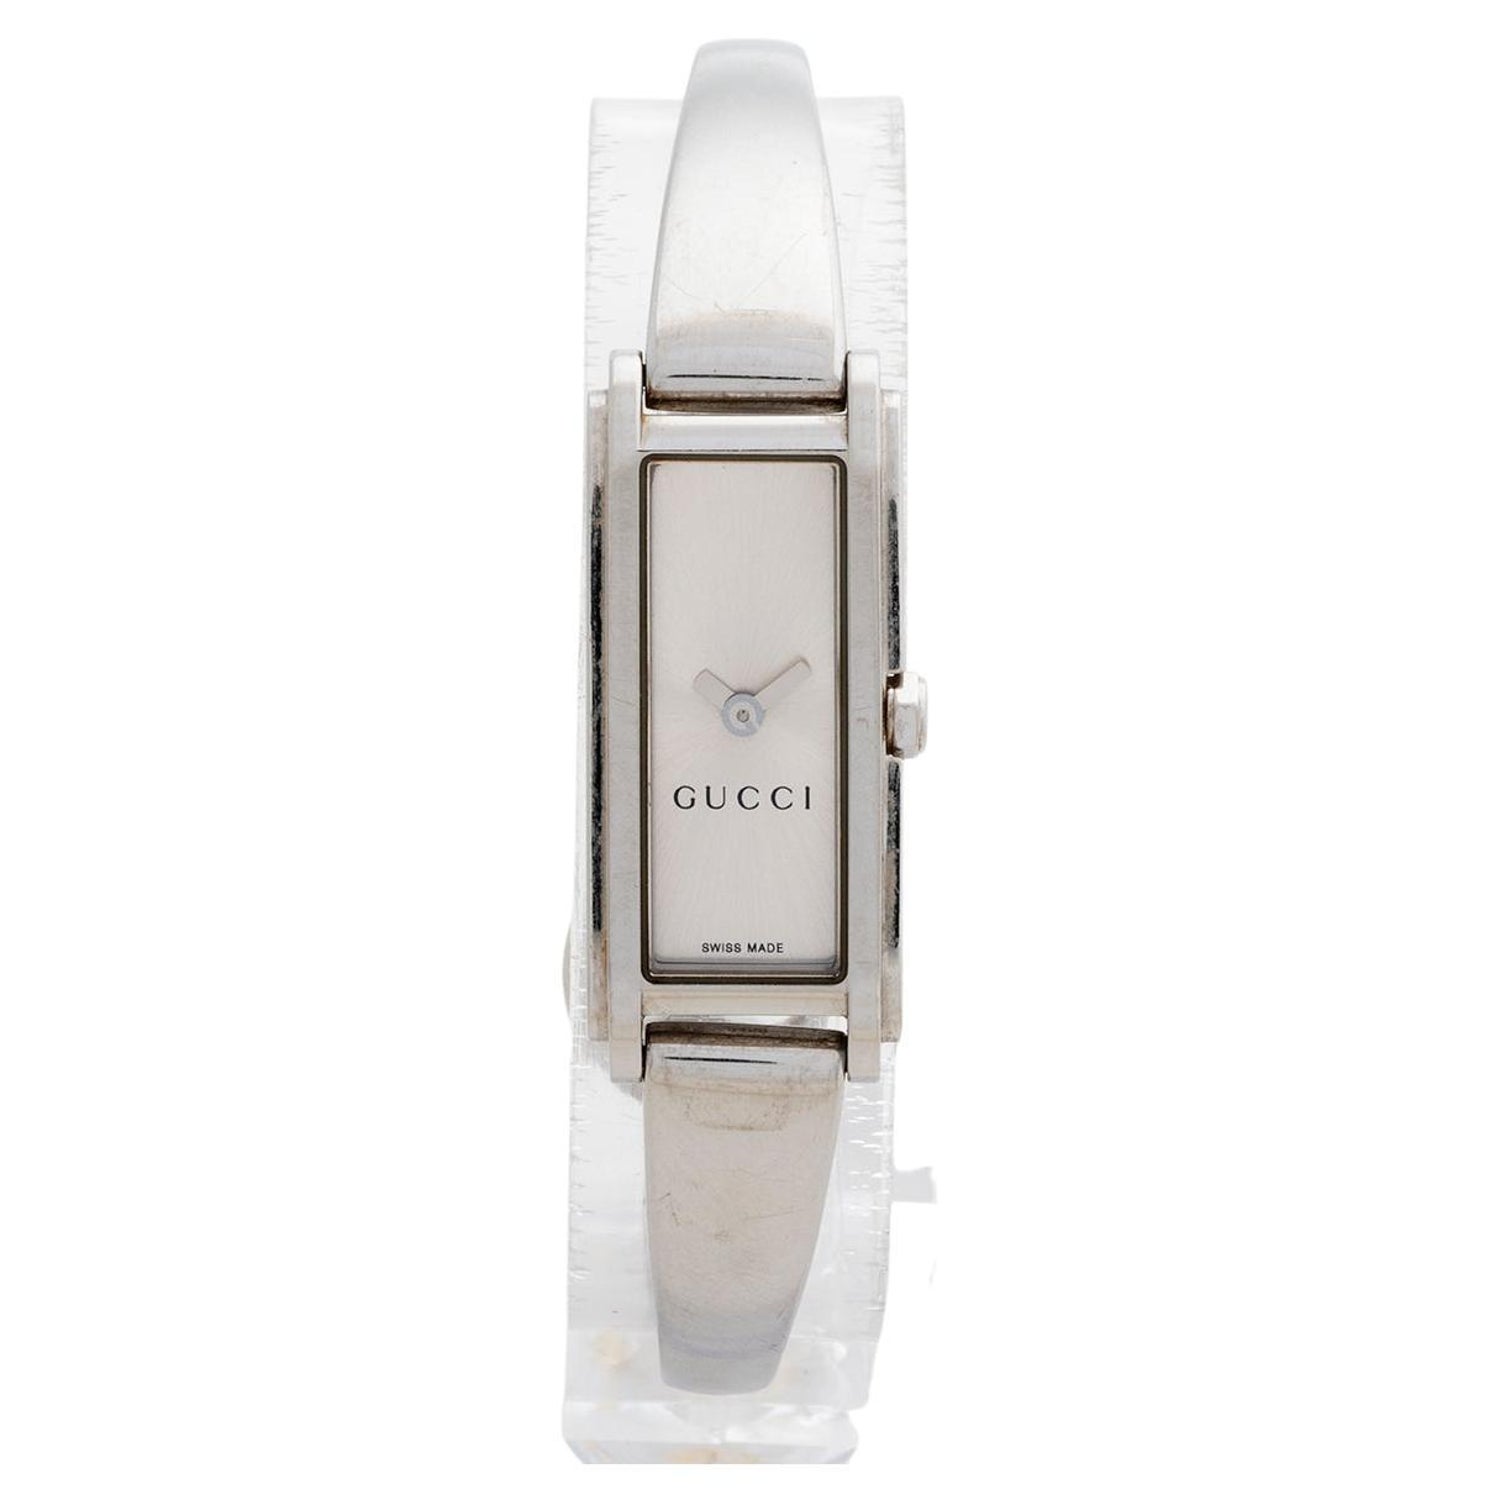 Gucci 109 Ladies Wristwatch, Iconic 2000's Style, Good Condition at 1stDibs